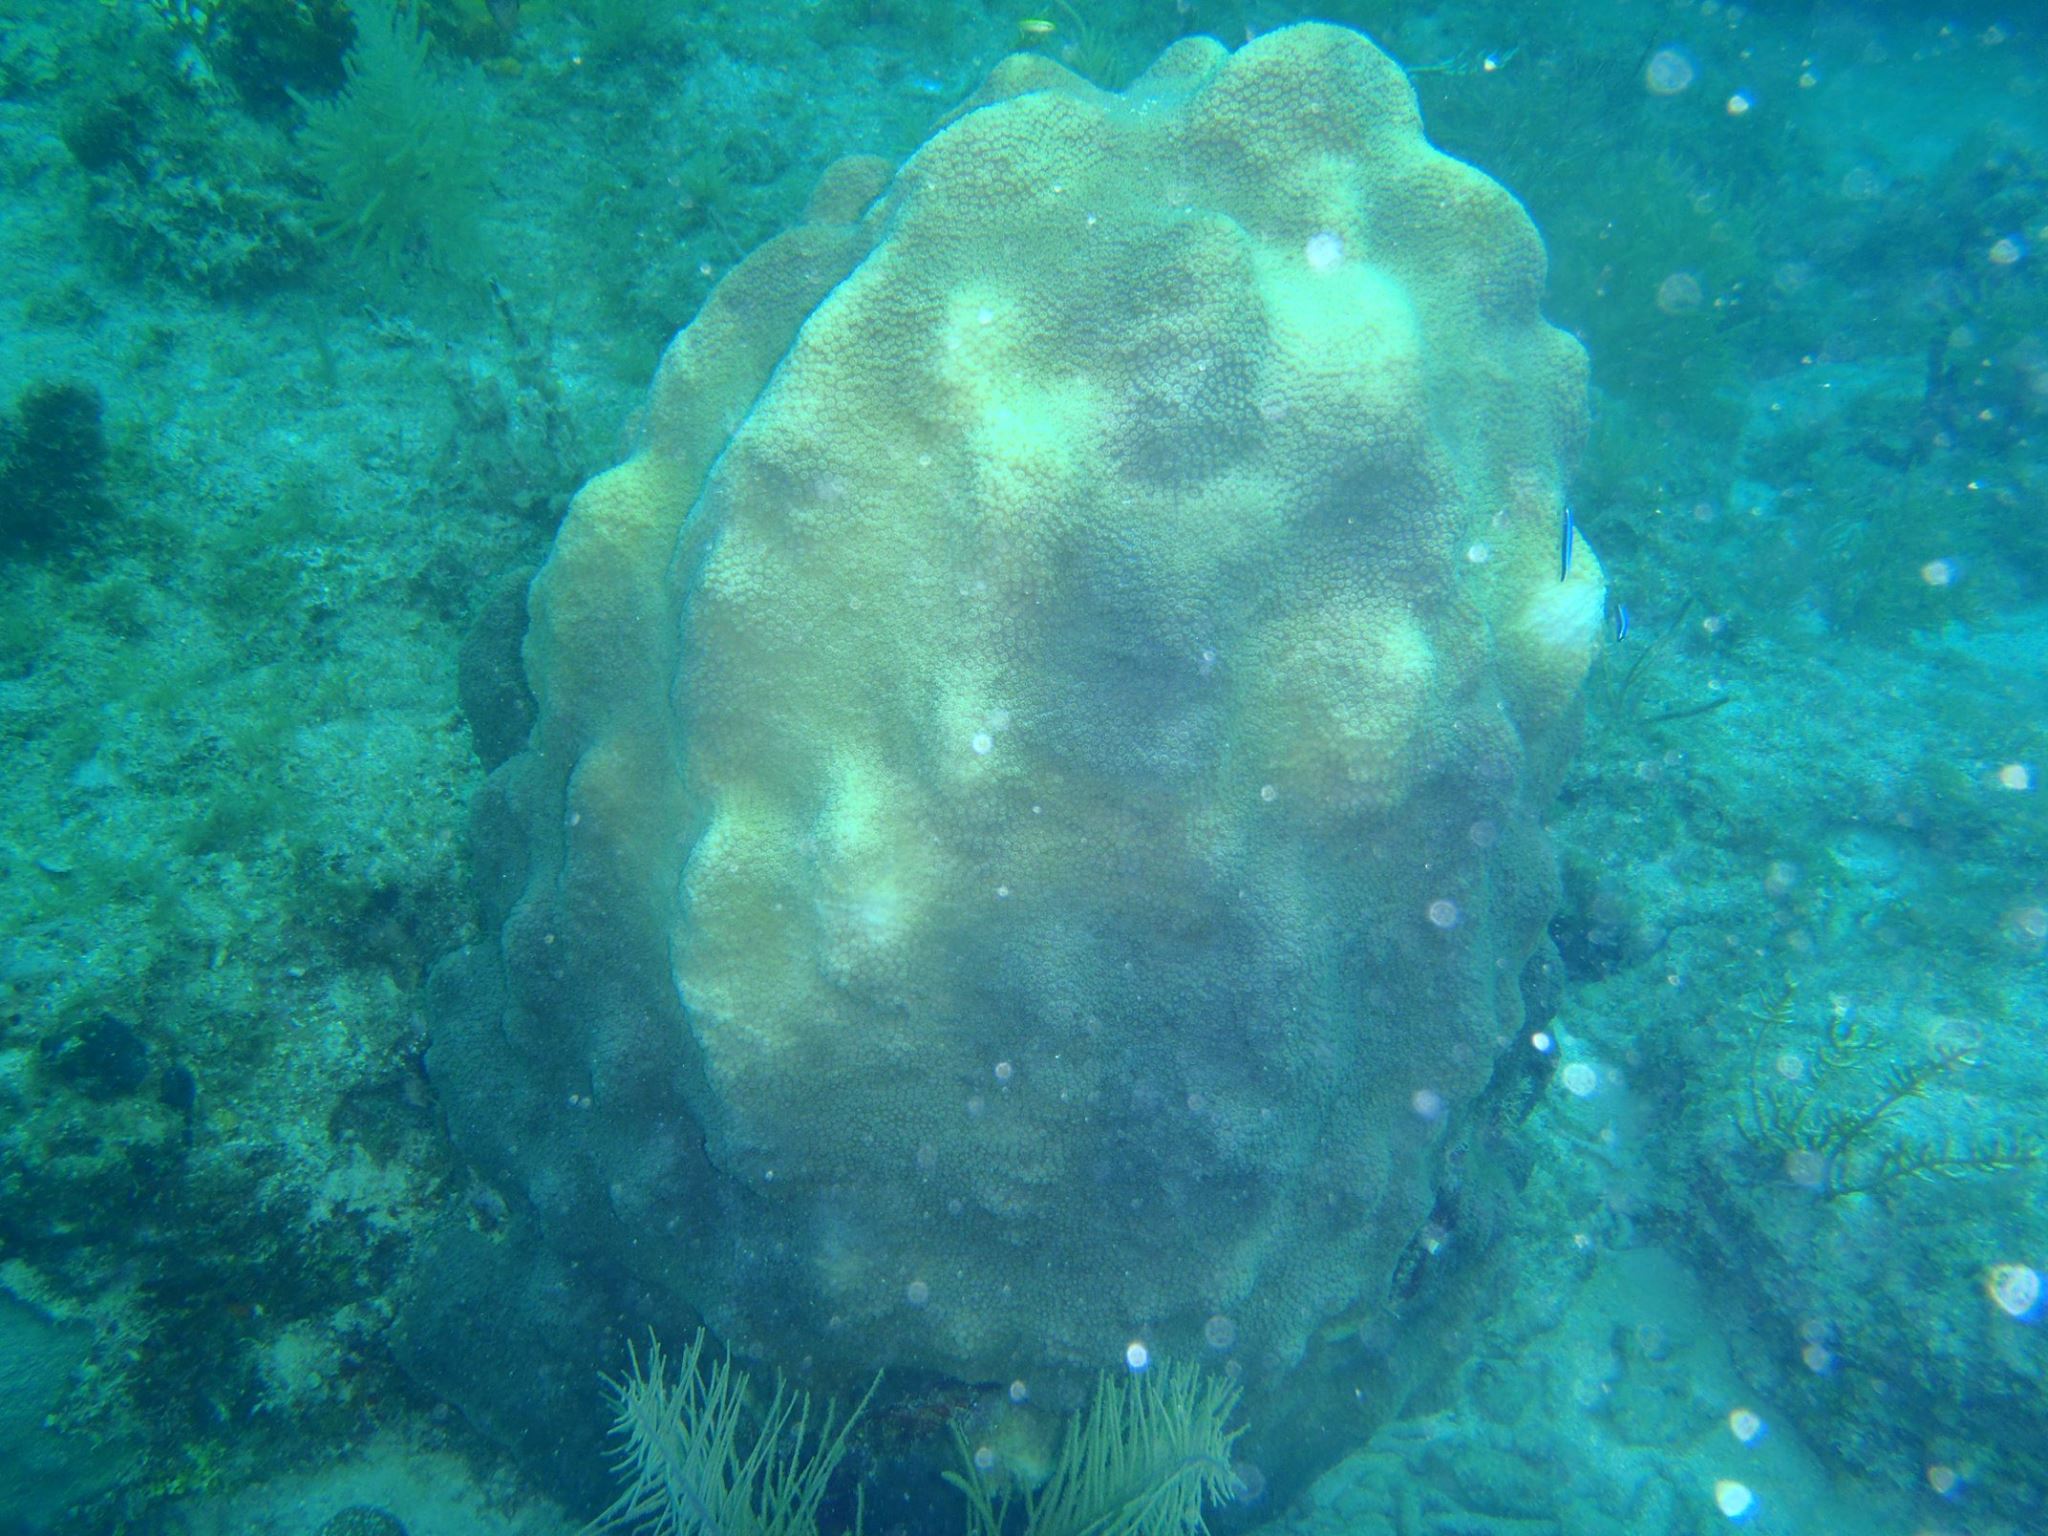 Mountainous Star Coral, Orbicella faveolata (formerly Montastraea faveolata) showing early signs of bleaching.